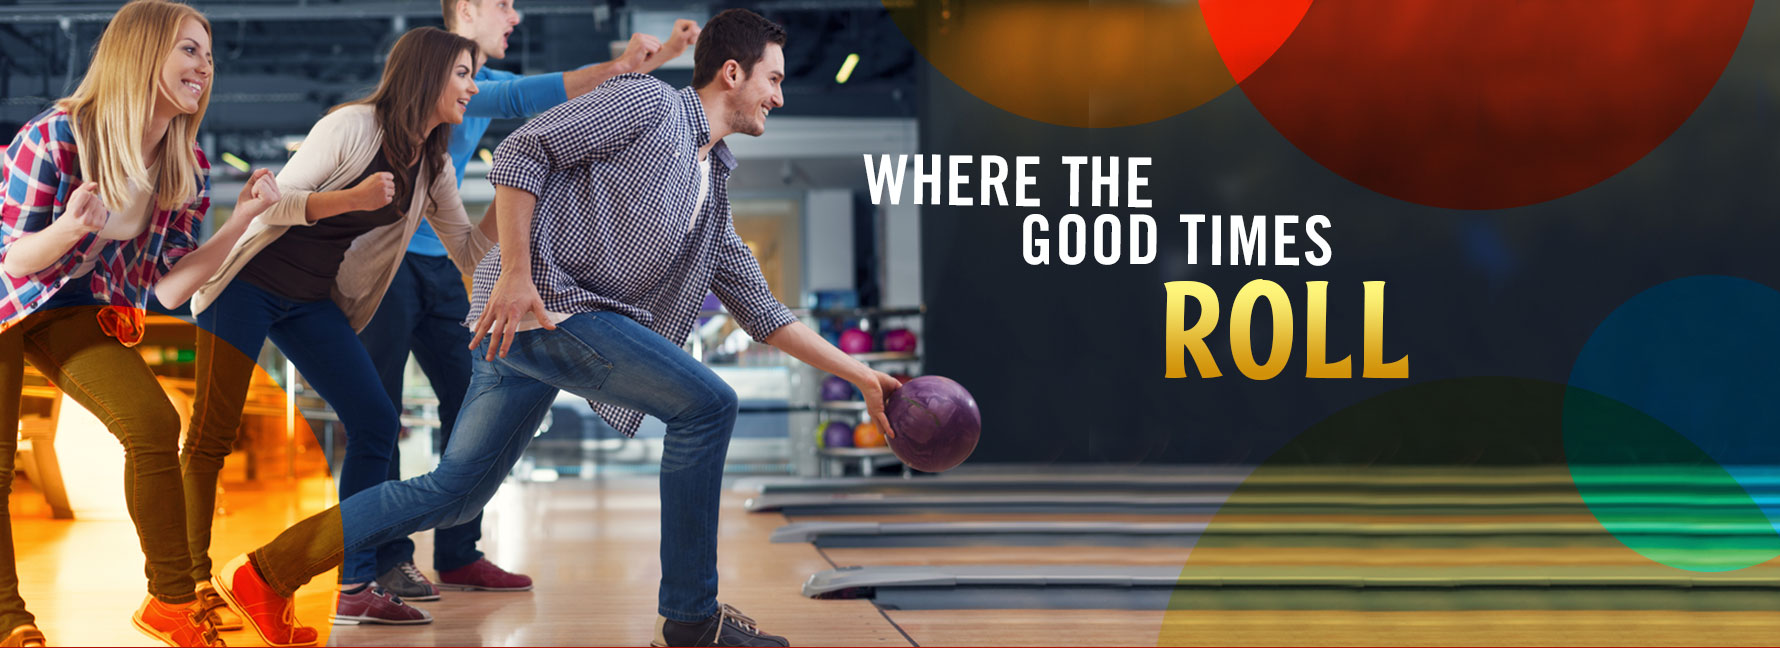 Where the Good Times Roll, People bowling